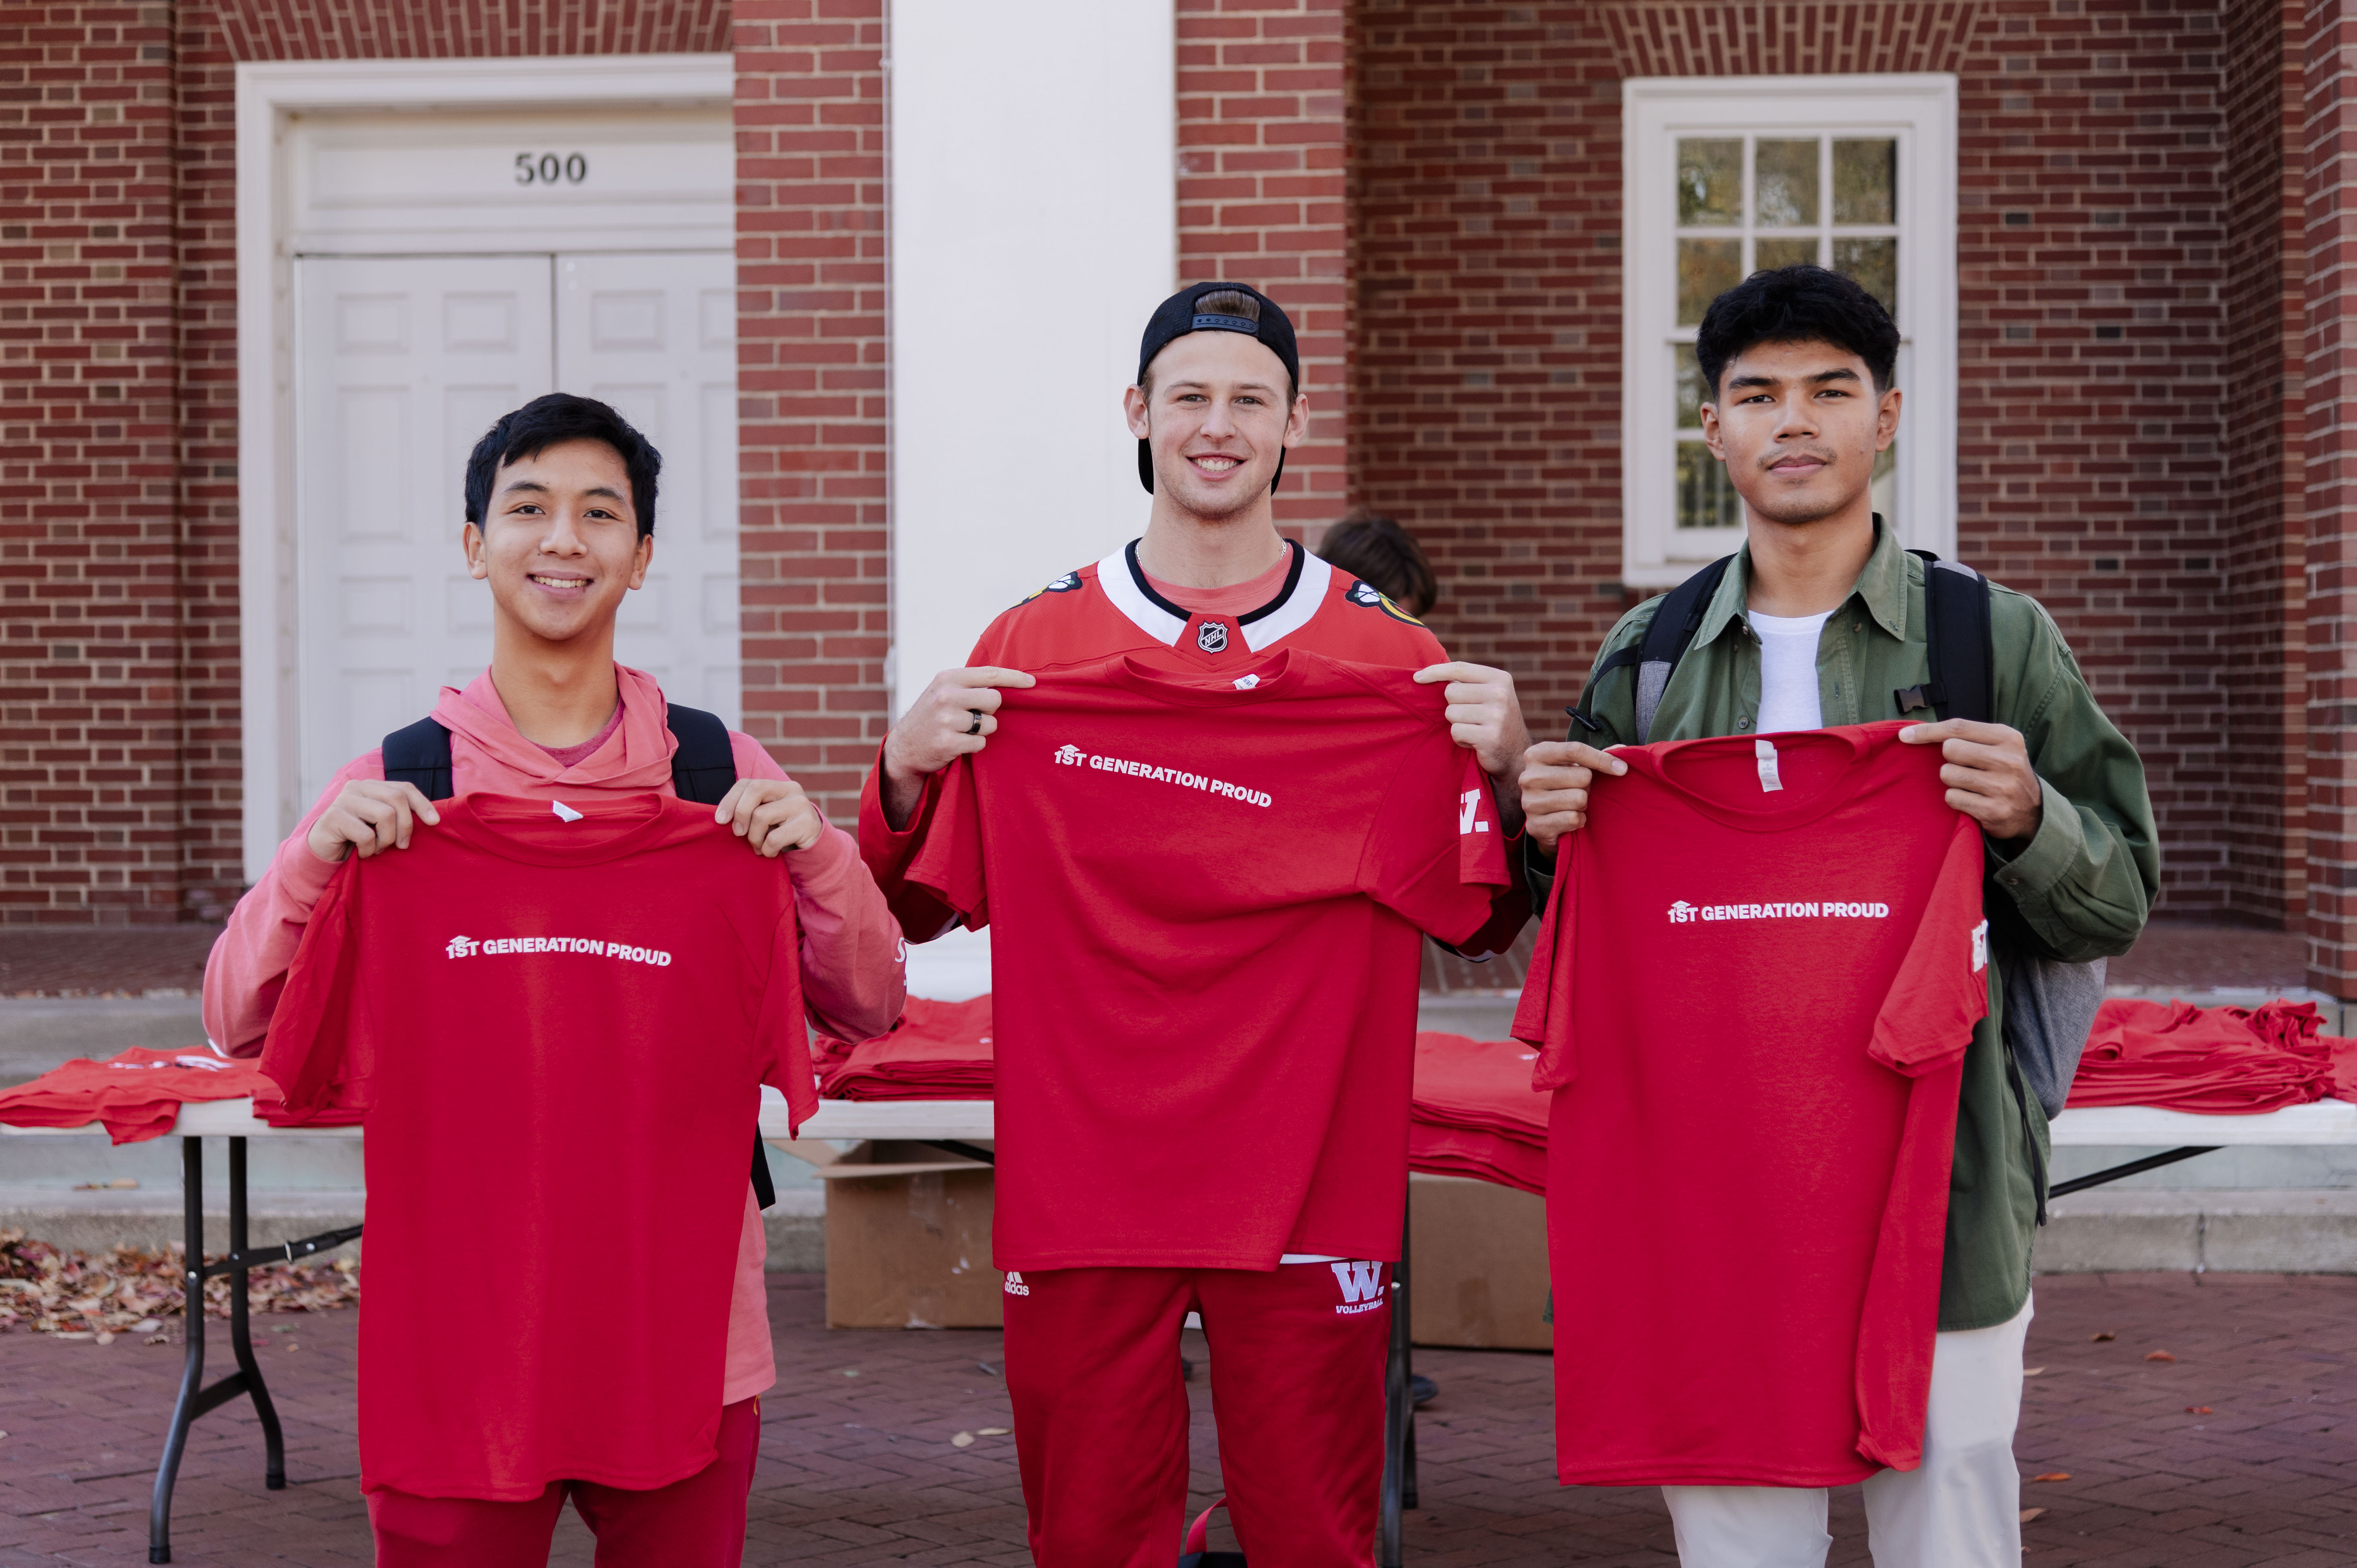 In Celebration of National First-Generation College Student Day, the College handed out red ‘1st Generation Proud’ T-shirts to first-generation Wabash students, faculty, and staff. 